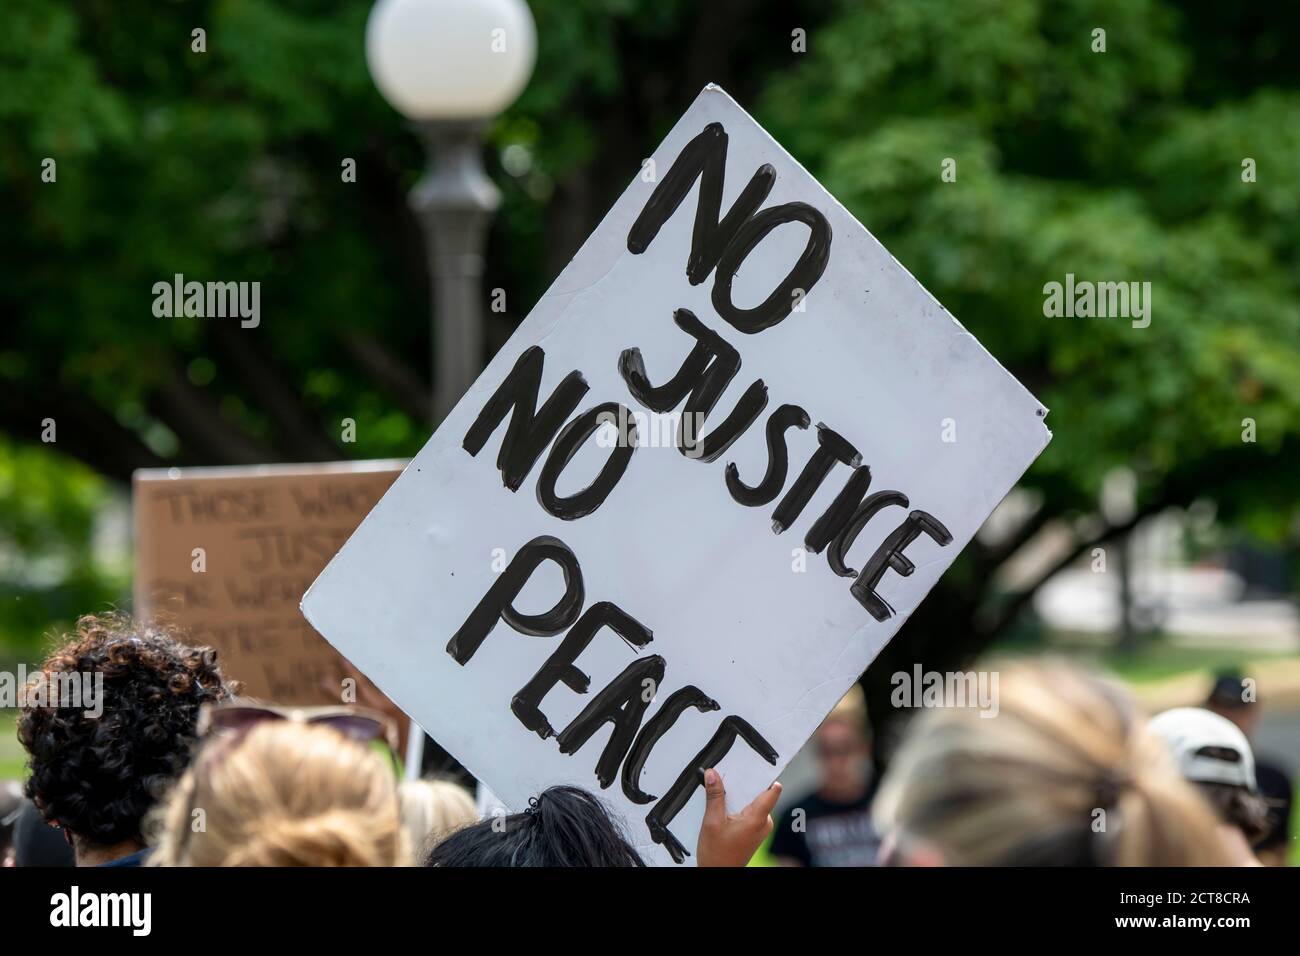 St. Paul, Minnesota. August 22, 2020. Youth march and rally to end violence.  Protester holding a no justice no peace sign at the rally. Stock Photo